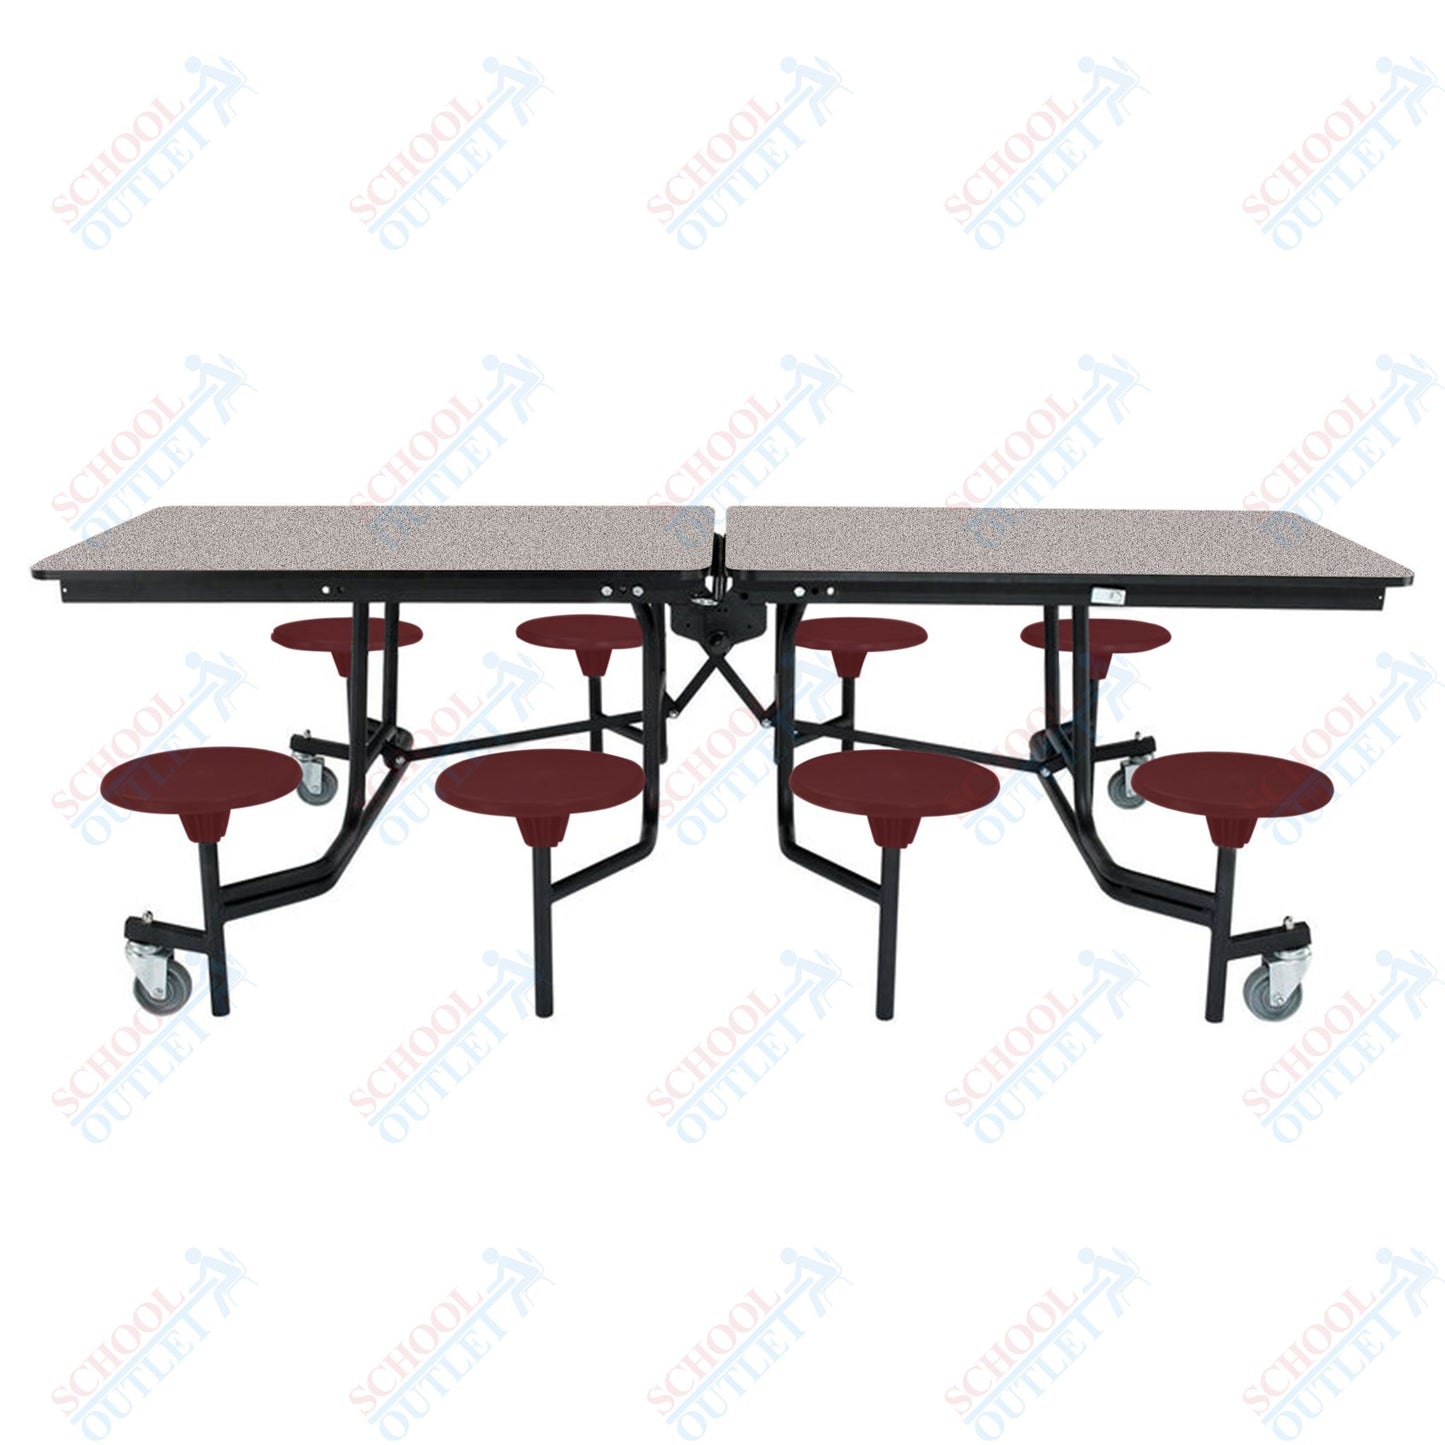 NPS Mobile Cafeteria Table - 30" W x 8' L - 8 Stools - MDF Core - Protect Edge - Chrome Frame